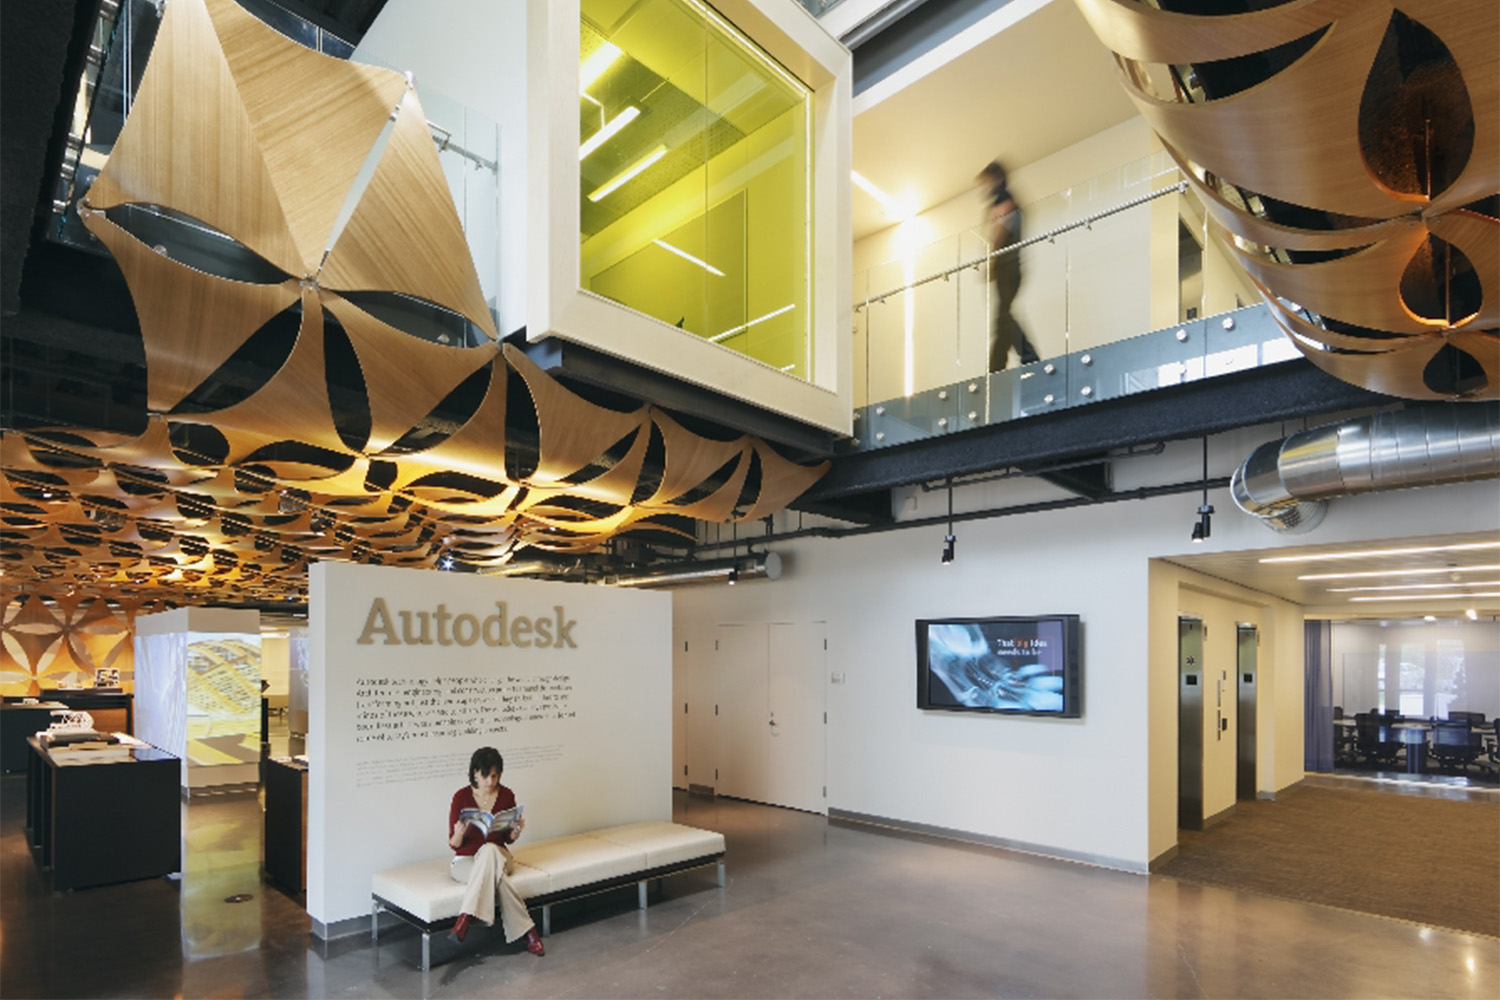 View from lobby entrance: Autodesk sign and view of floating conference rooms 